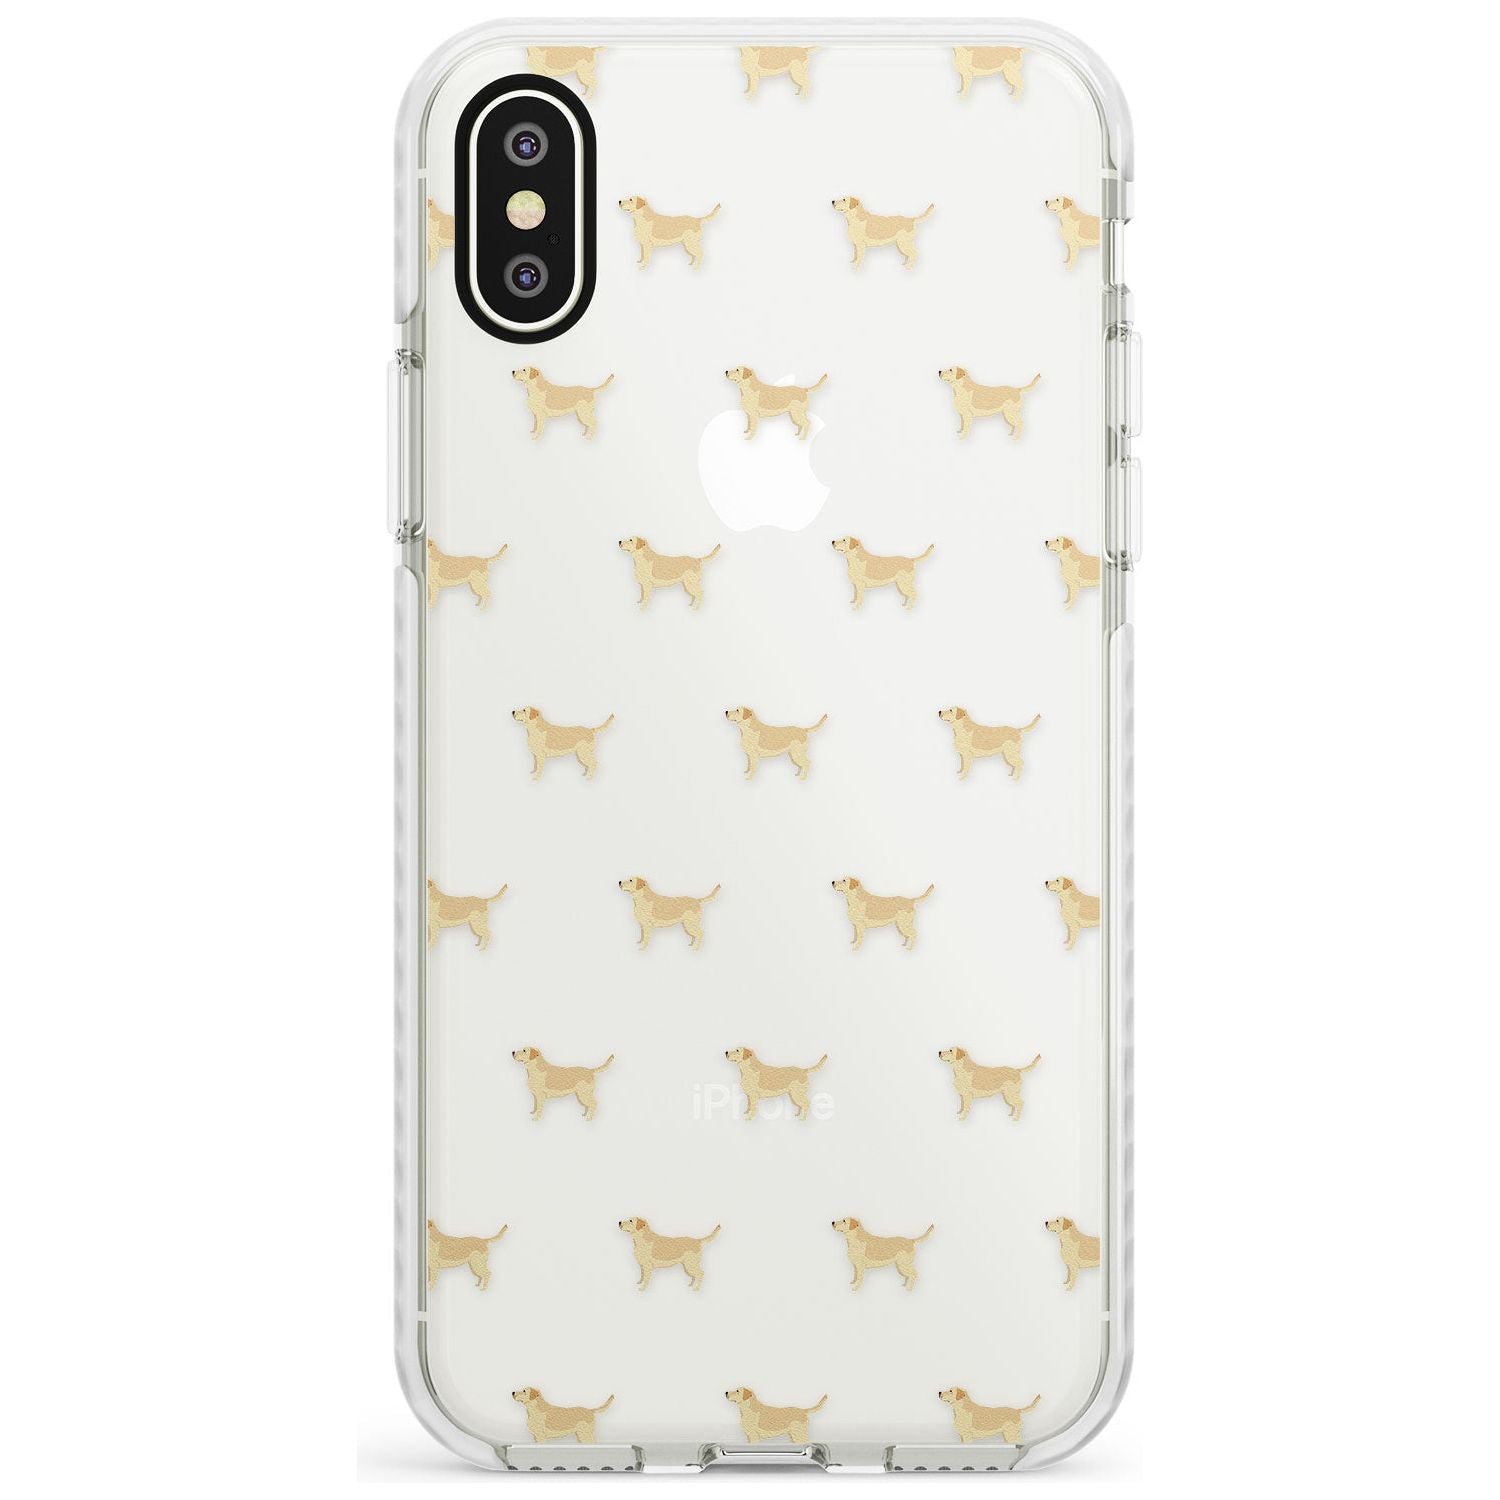 Tan Labrador Dog Pattern Clear Impact Phone Case for iPhone X XS Max XR